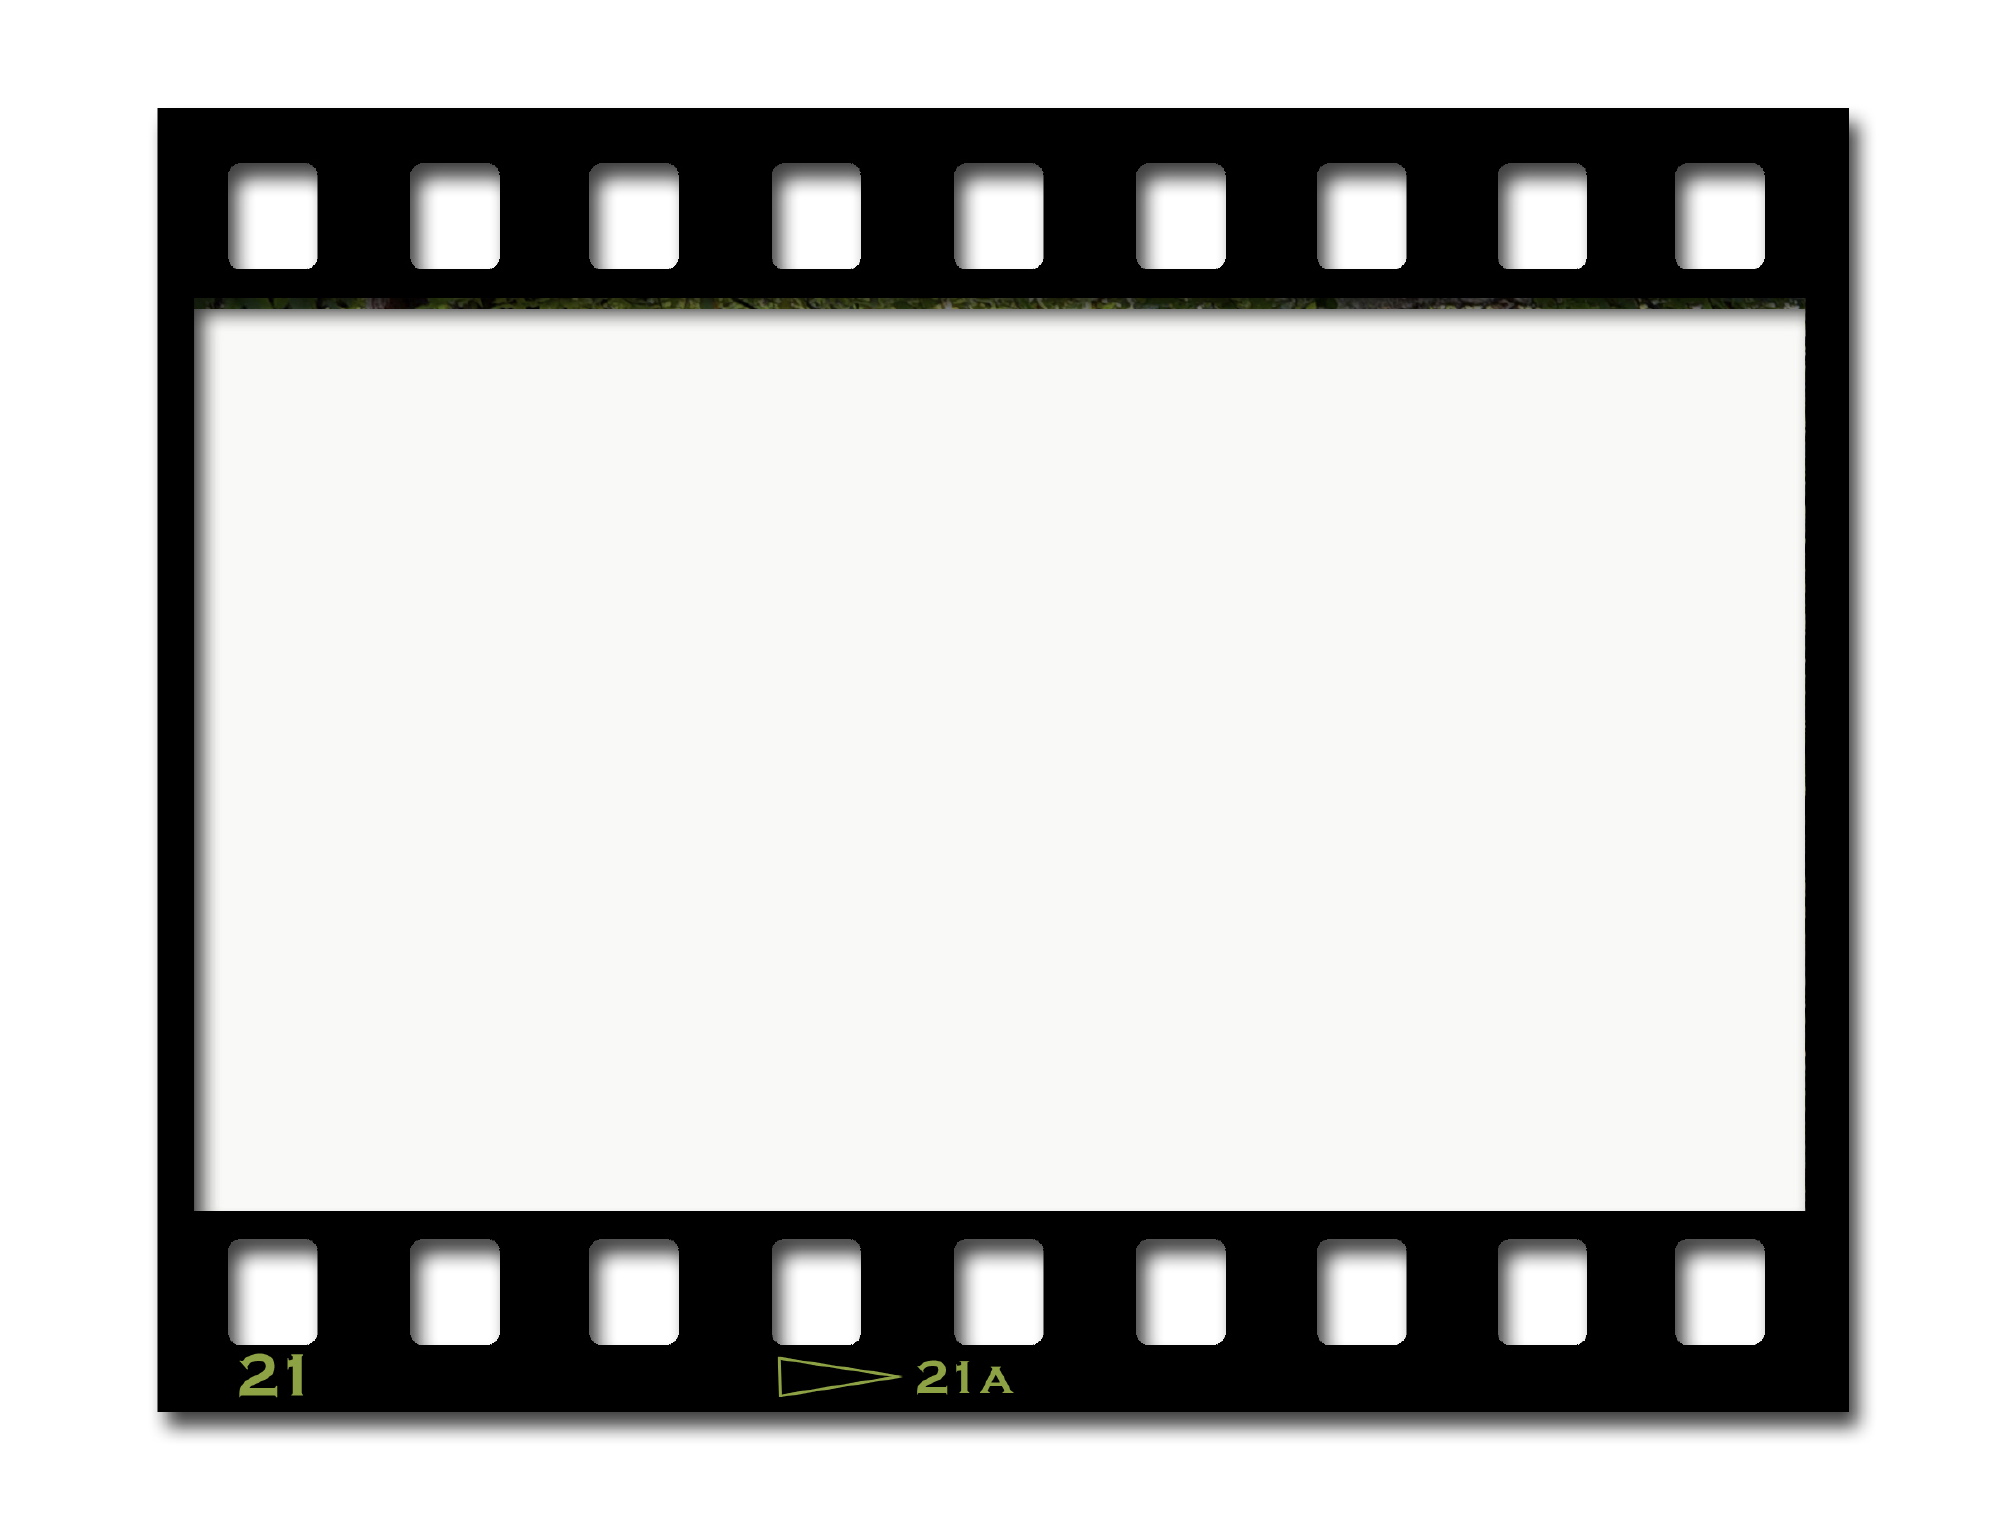 Filmstrip Png - Free Icons and PNG Backgrounds